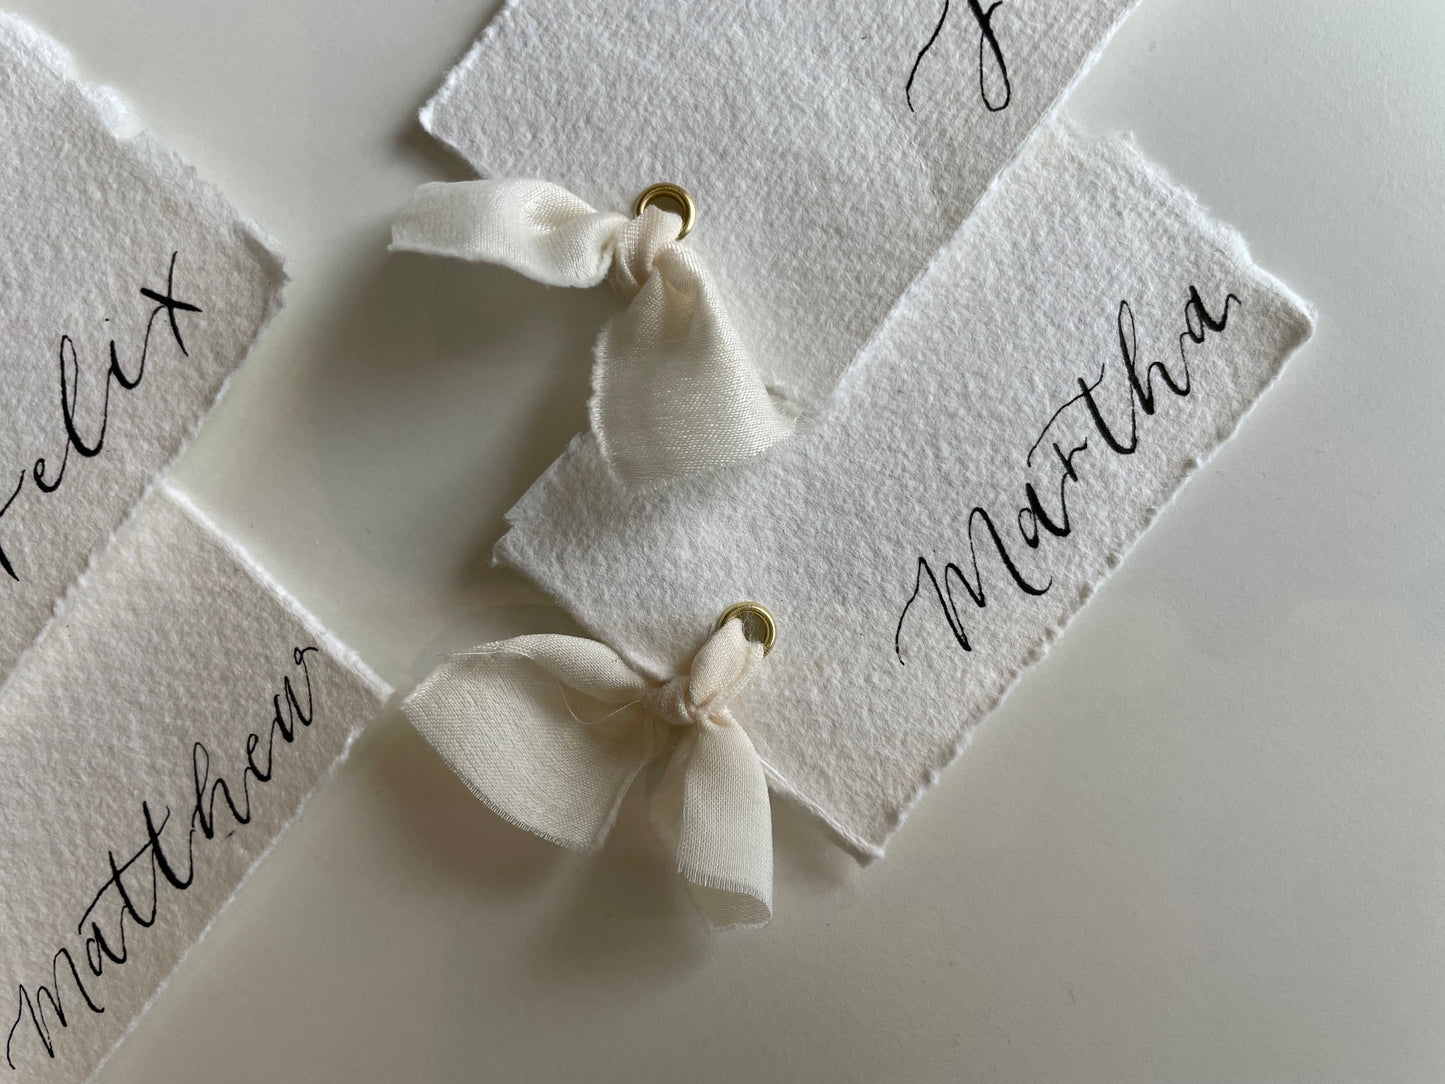 Handmade Paper Place Card Chiffon Ribbon | Calligraphy Wedding Place Name Card | Gold or Silver Eyelet